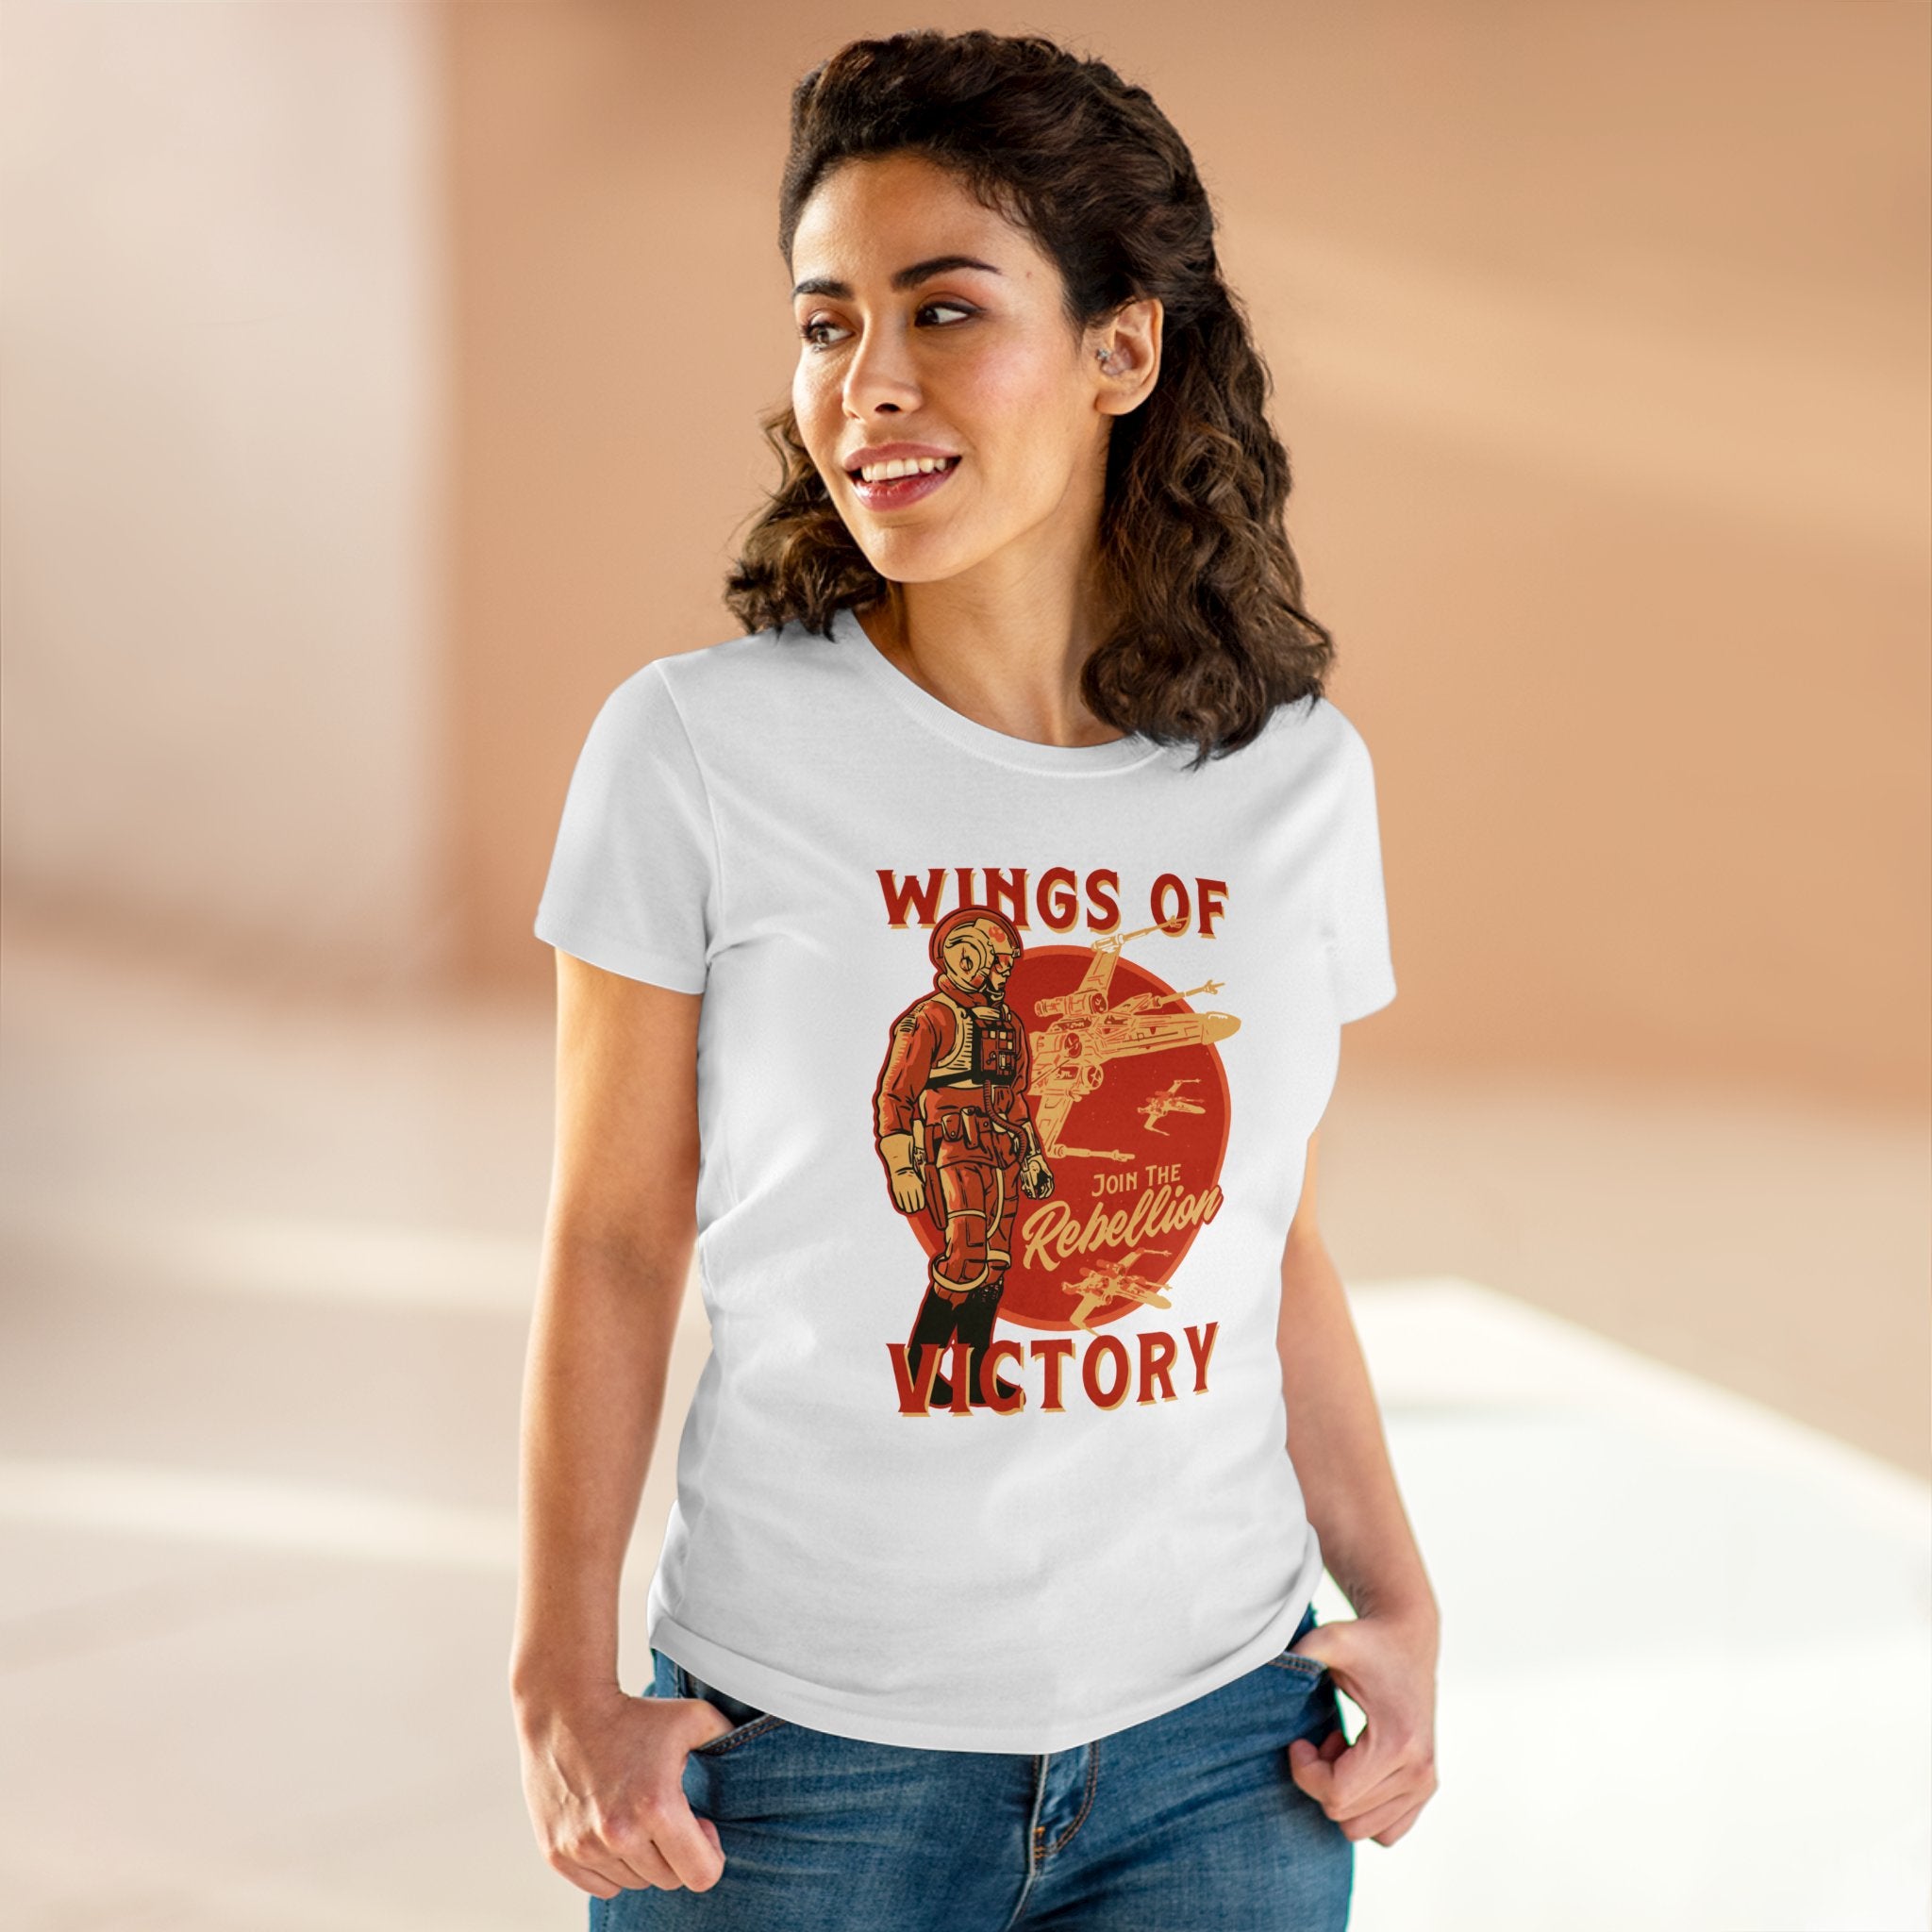 A woman with curly hair stands in a casual setting, wearing a pre-shrunk Wings of Victory - Women's Tee featuring a graphic of a pilot and the text "Wings of Victory - Join the Rebellion.